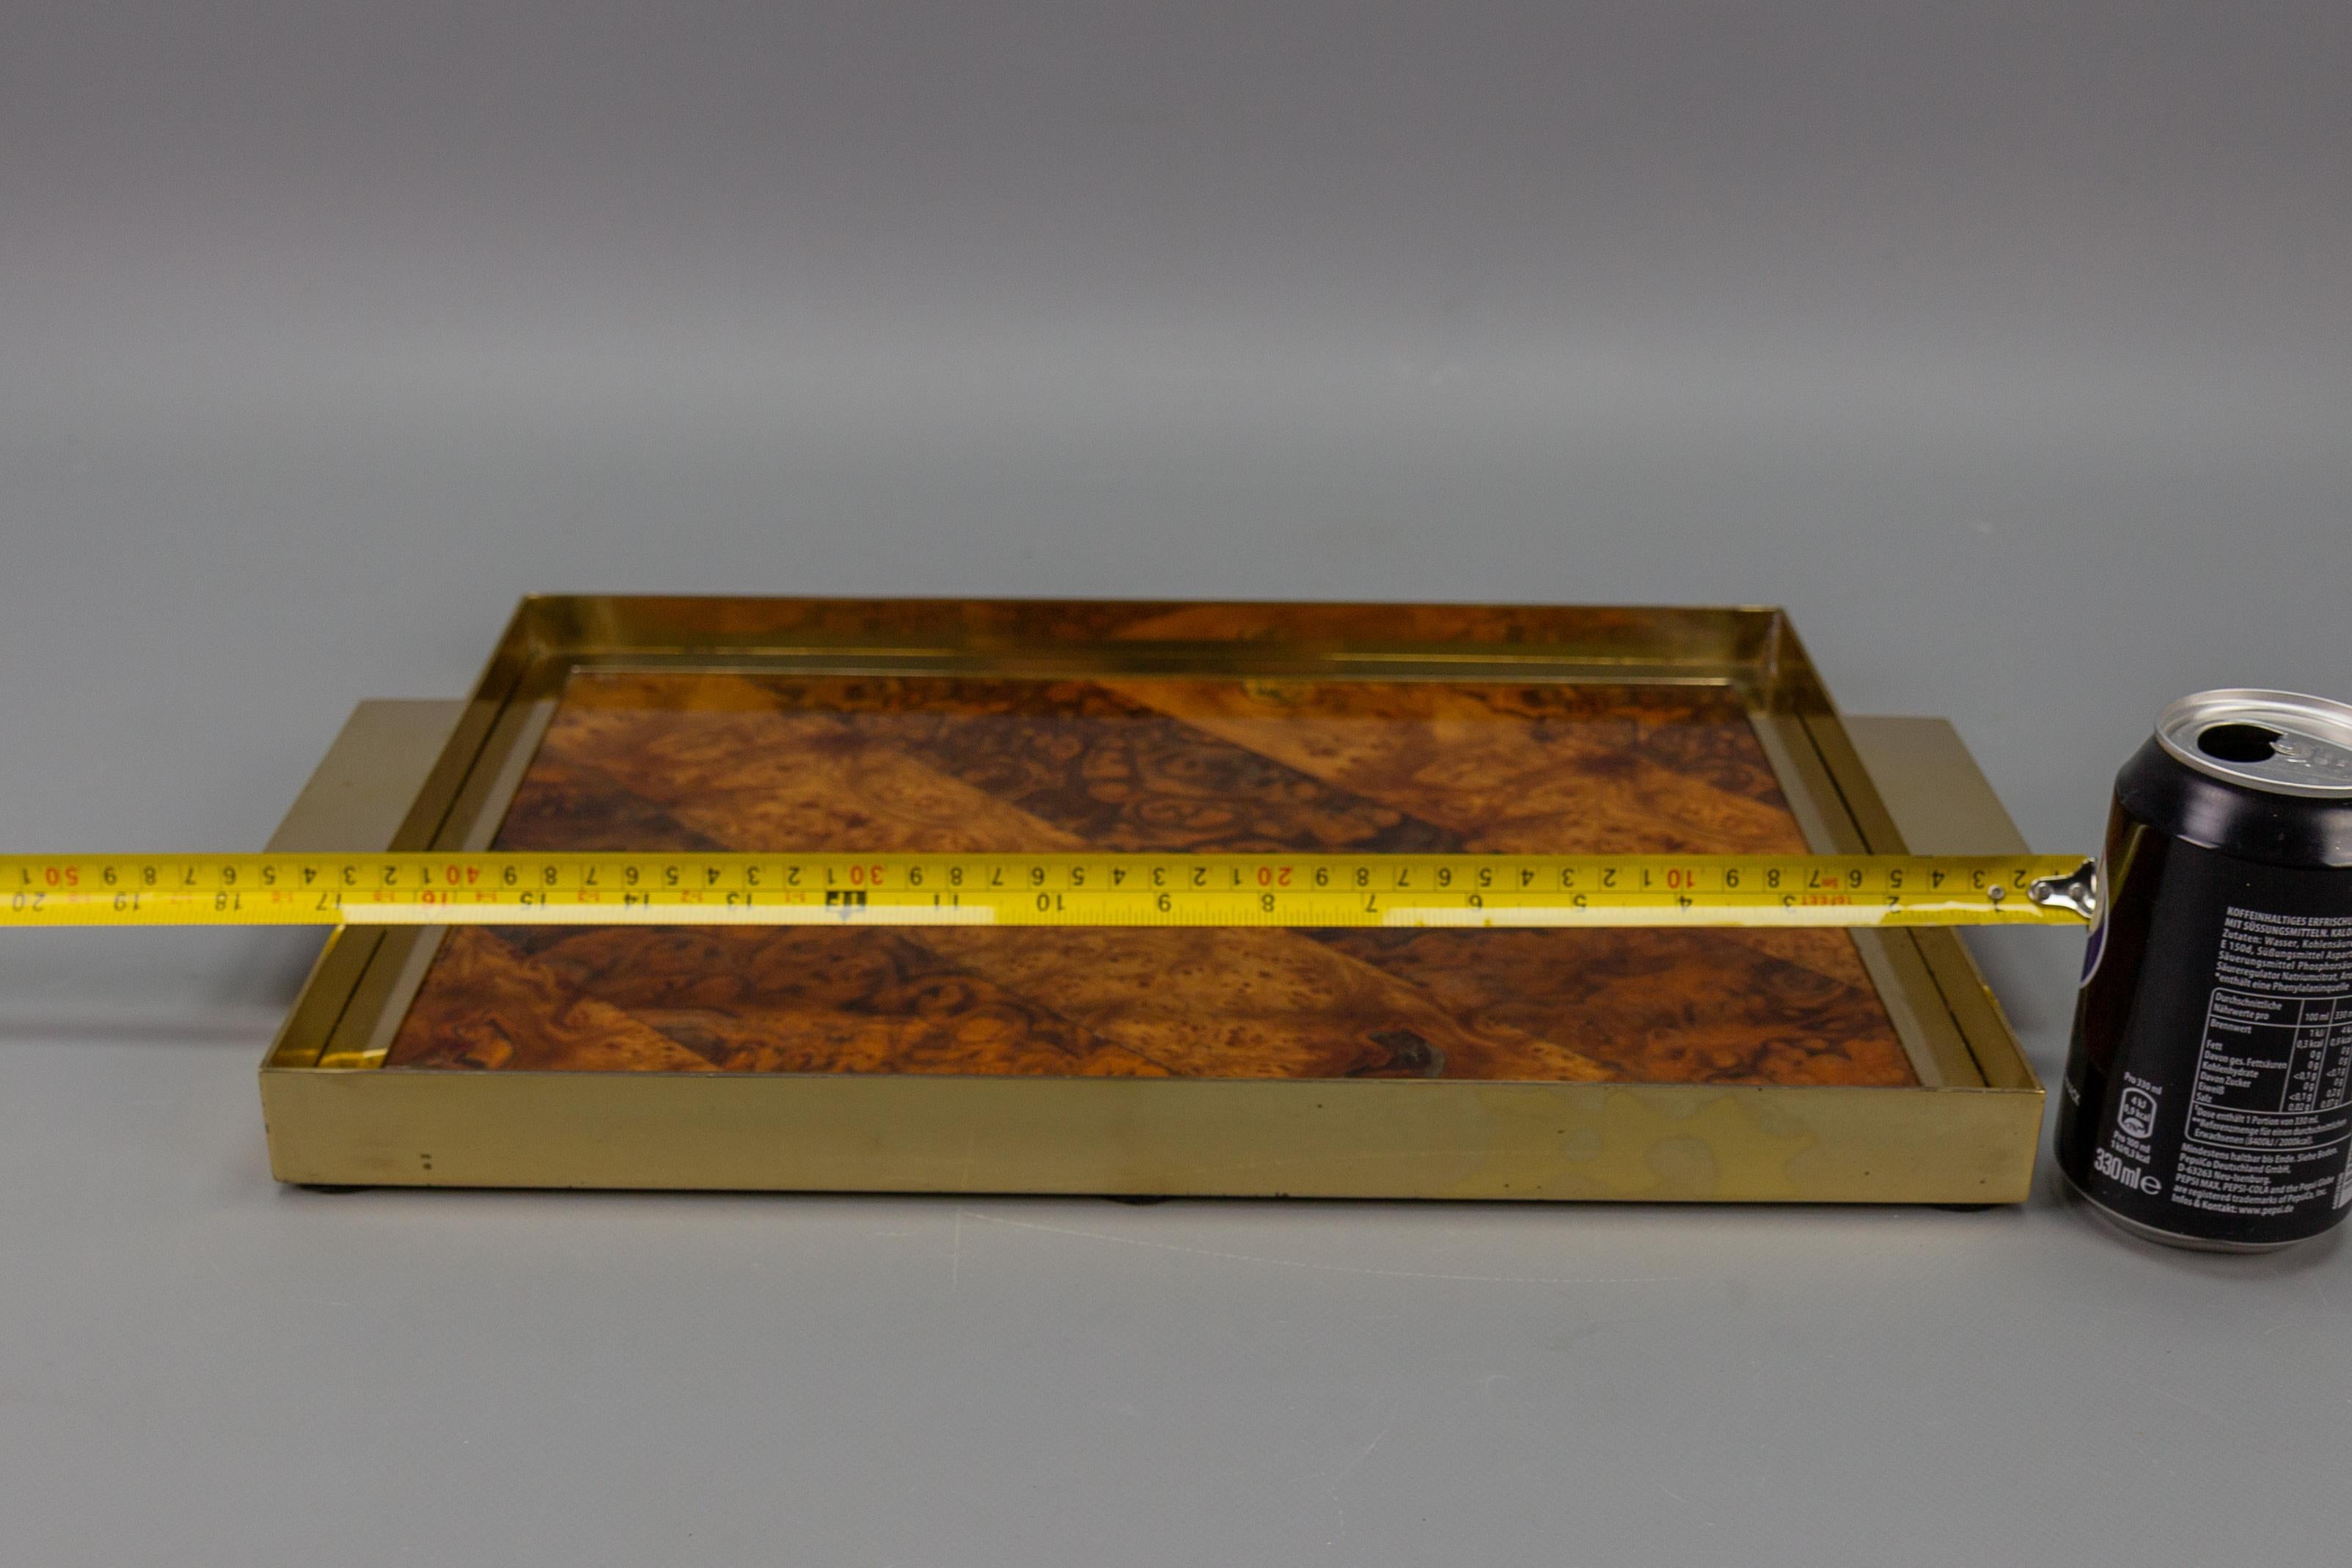 Mid-Century Brown and Golden Color Serving Tray with Burr Wood Effect, 1960s For Sale 9